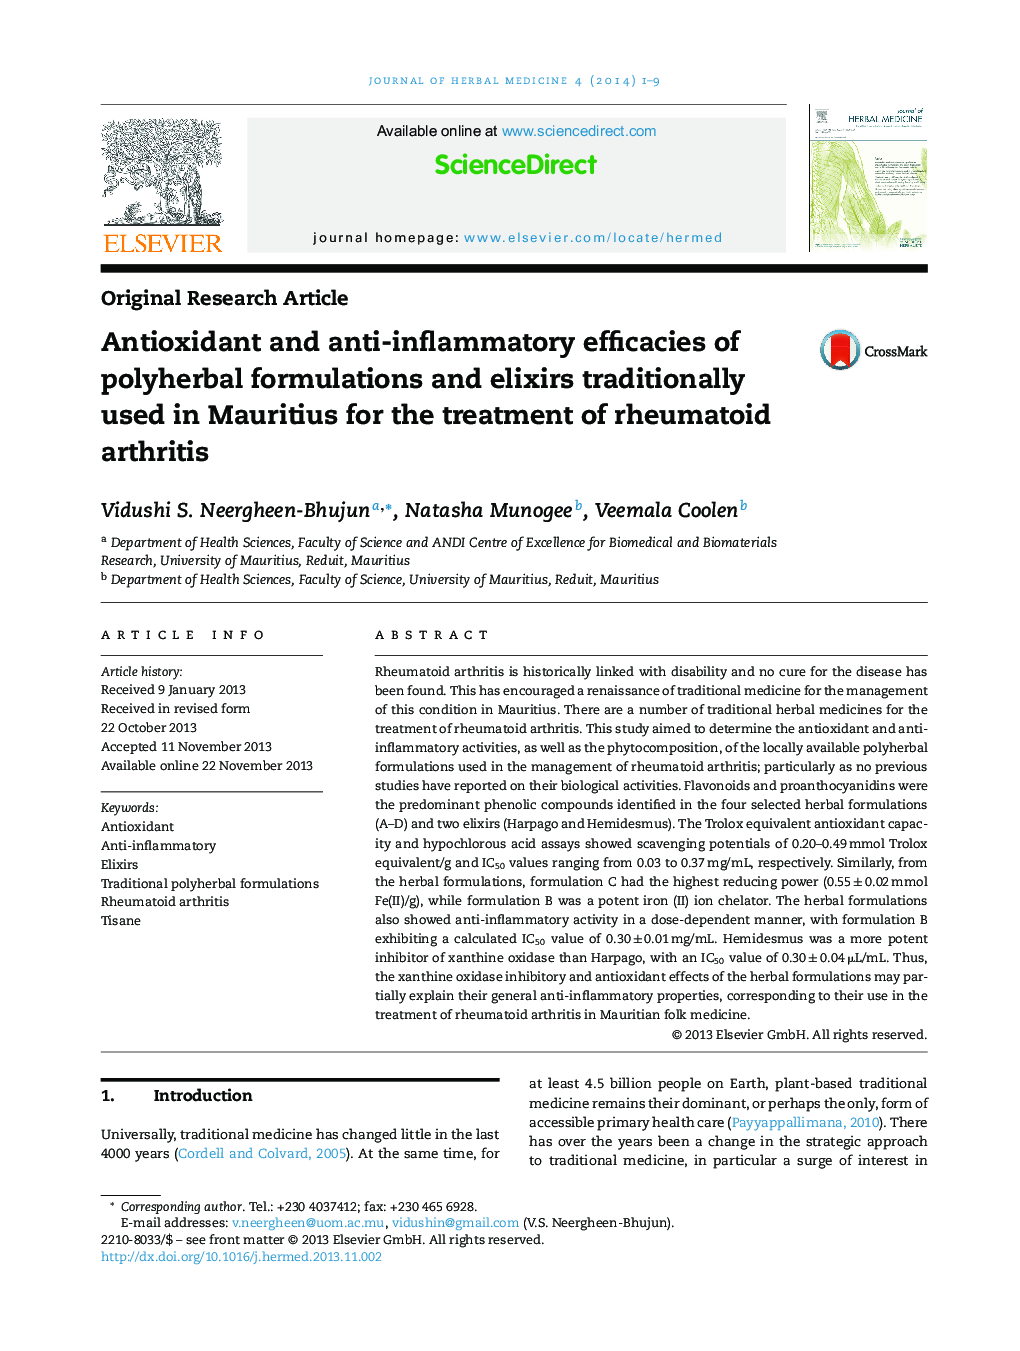 Antioxidant and anti-inflammatory efficacies of polyherbal formulations and elixirs traditionally used in Mauritius for the treatment of rheumatoid arthritis